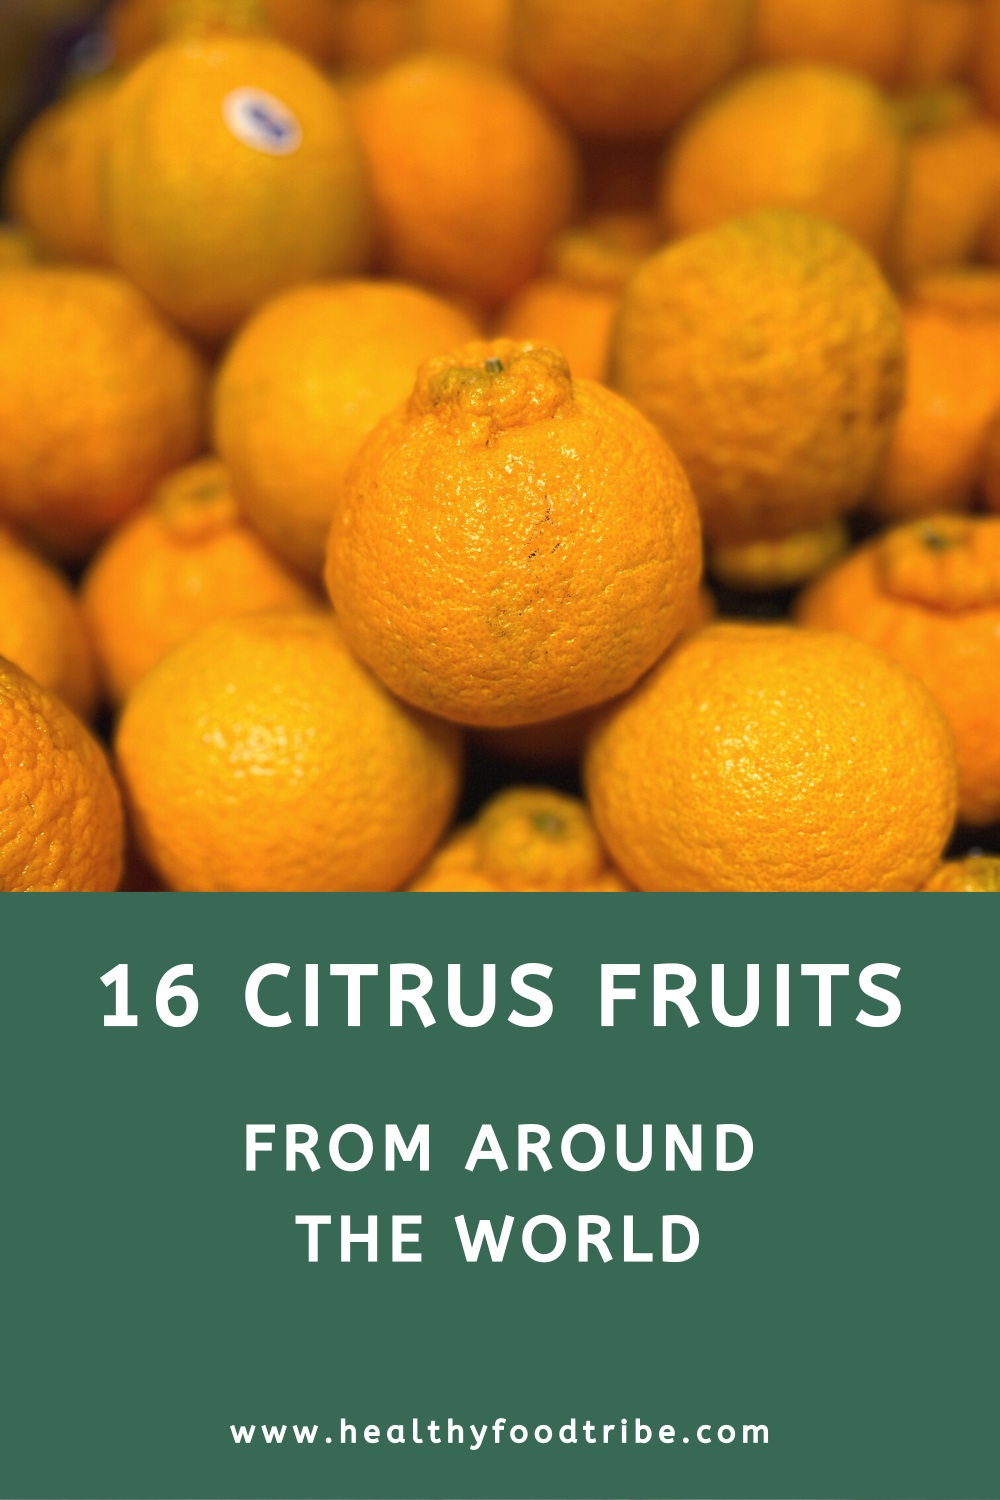 16 Citrus fruits from around the world